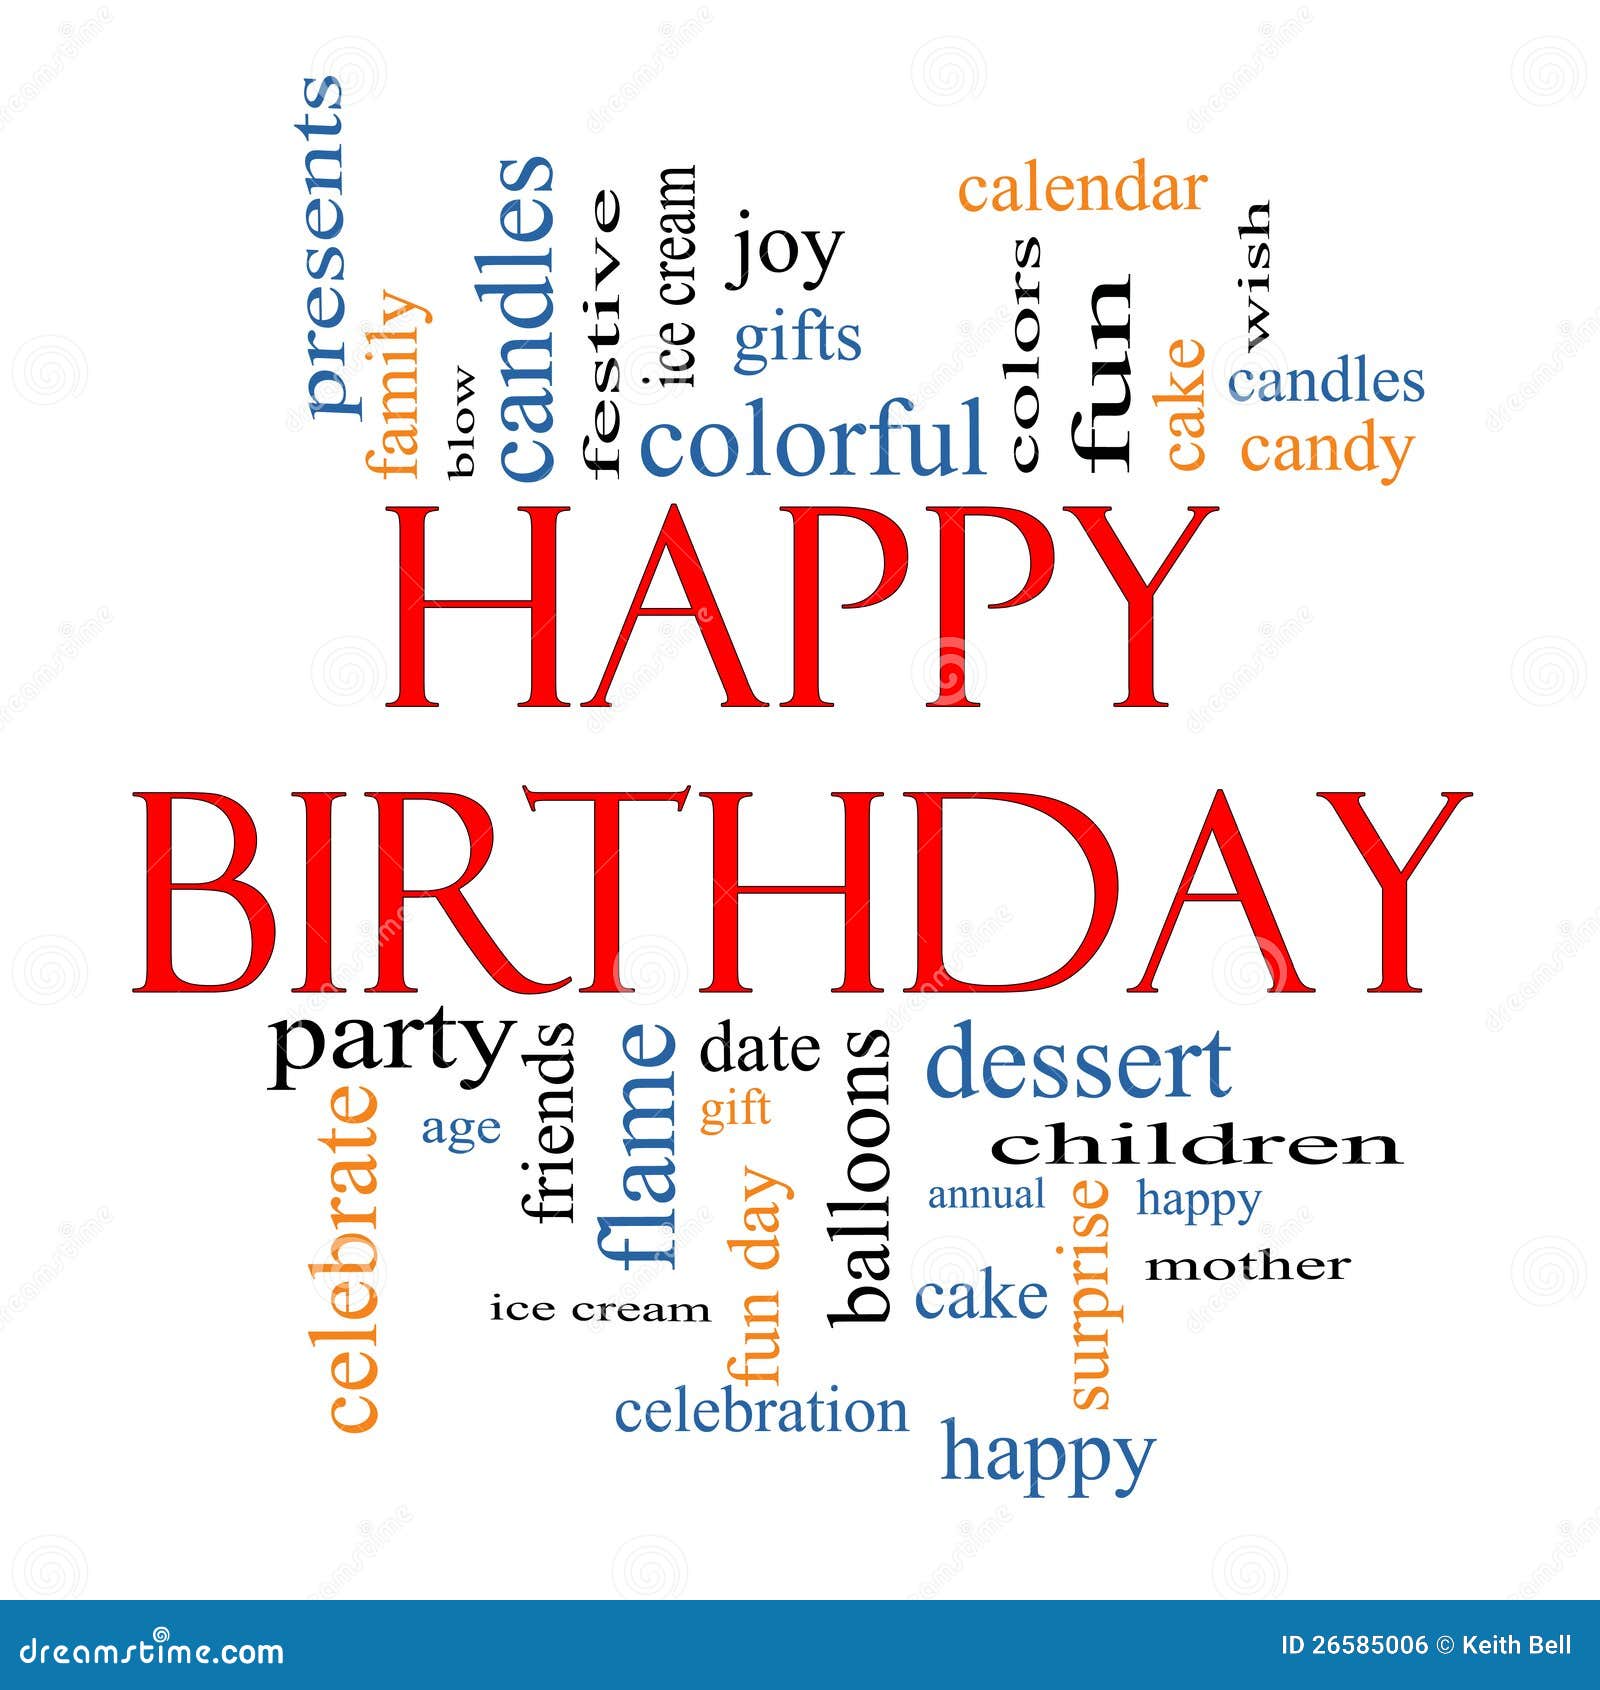 Happy Birthday Word Cloud Concept Royalty Free Stock Image - Image ...